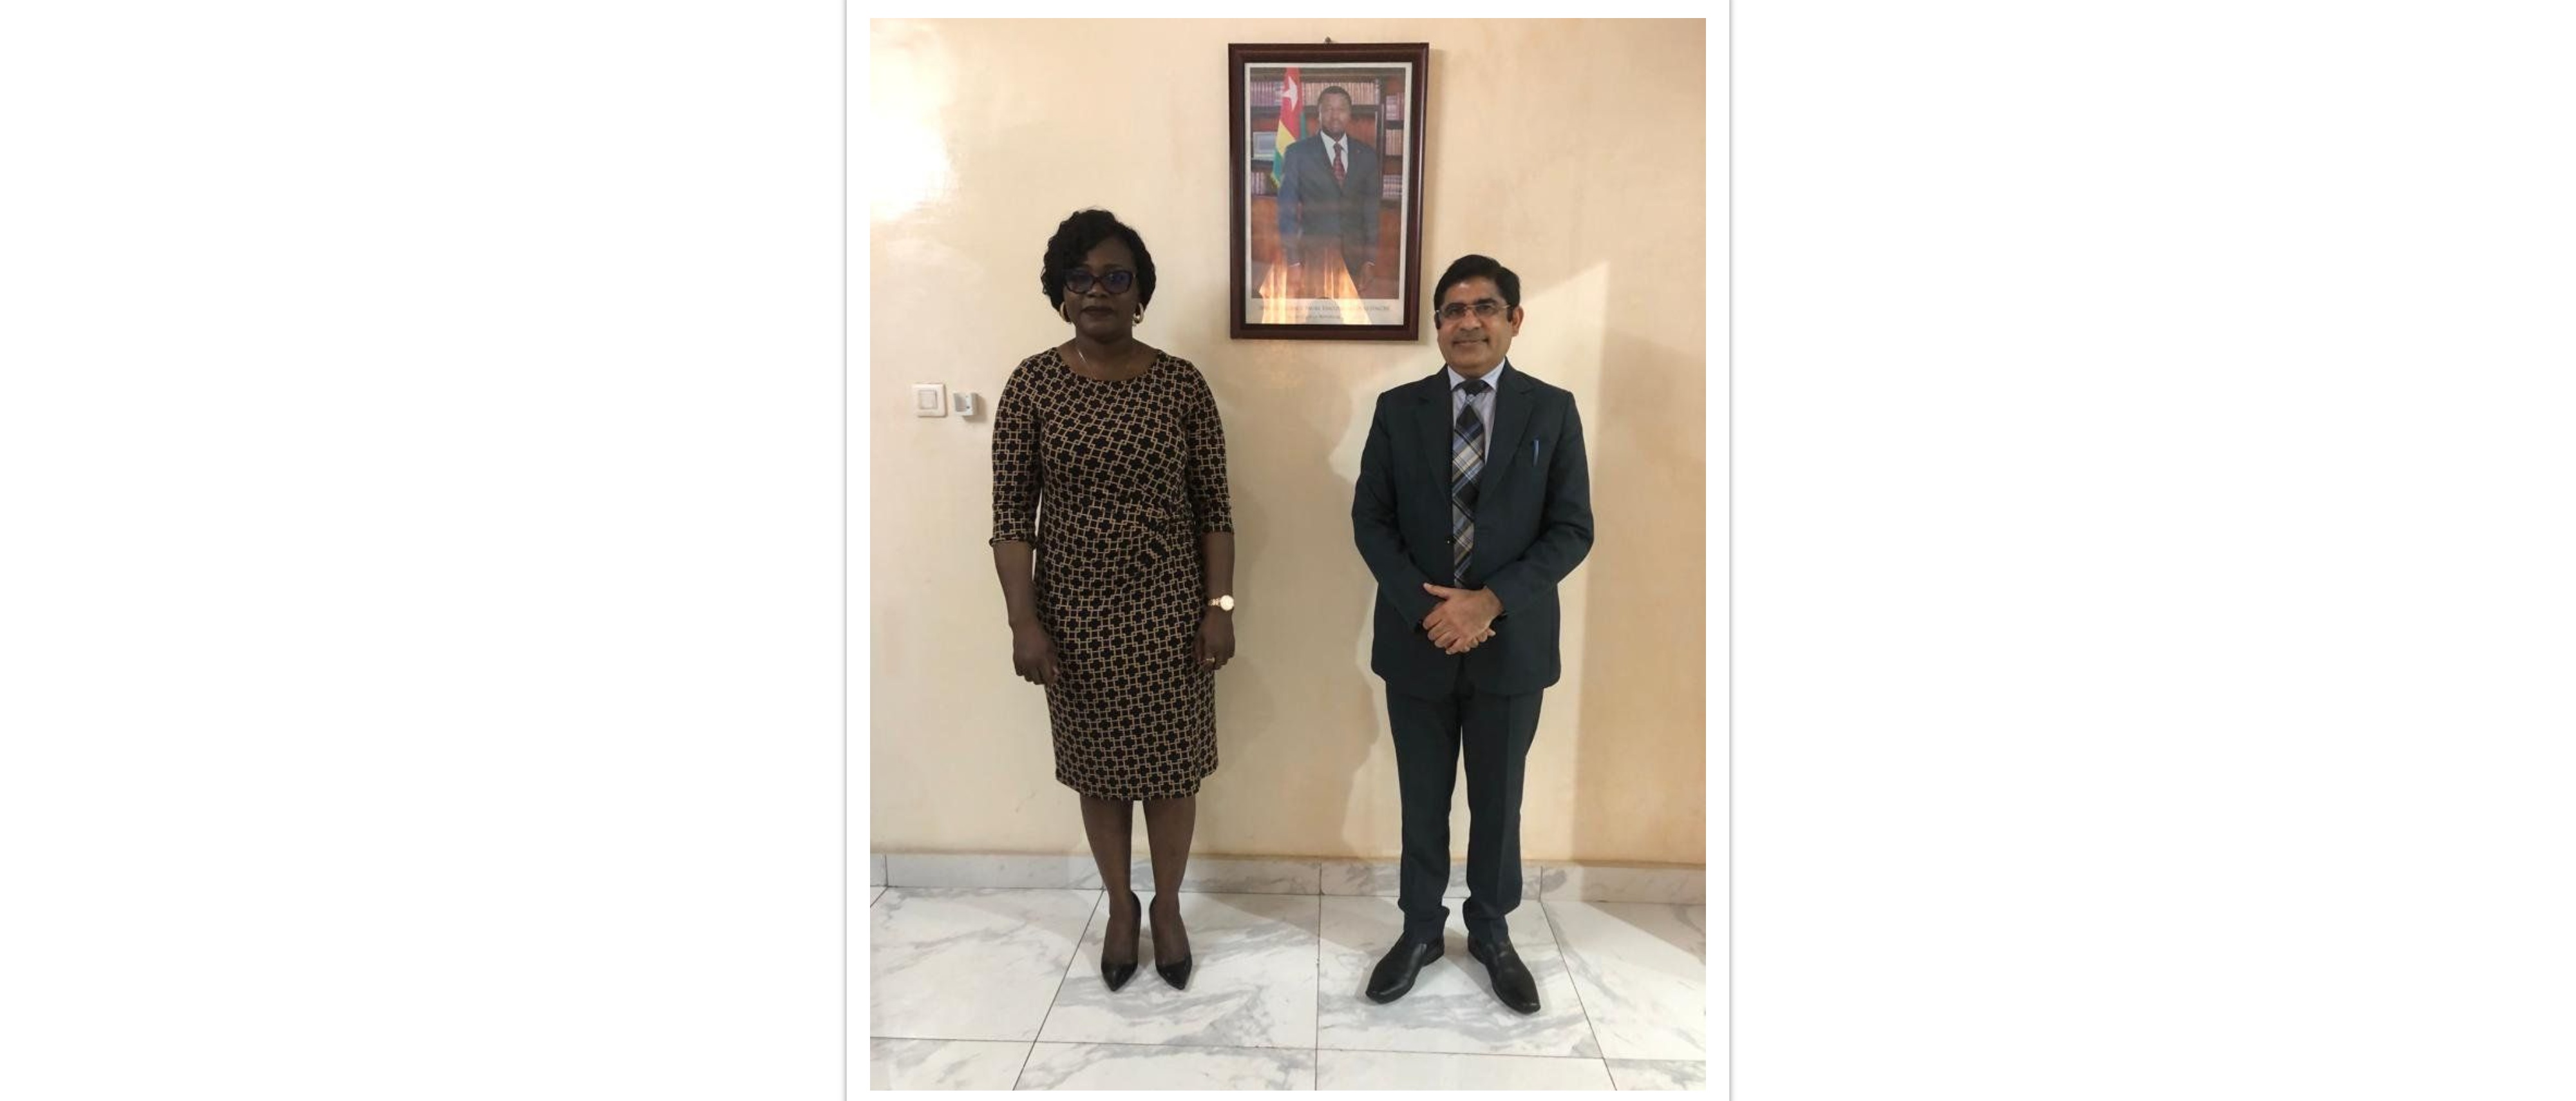  Ambassador Sanjiv Tandon called on Hon’ble Minister of Sports of Togo H.E. Dr. Lidi Bessi-Kama and discussed collaborative opportunities in the area of sports. They also discussed the participation of a 12-member Chess team from Togo at the 44th Chess Olympiad in Chennai.
